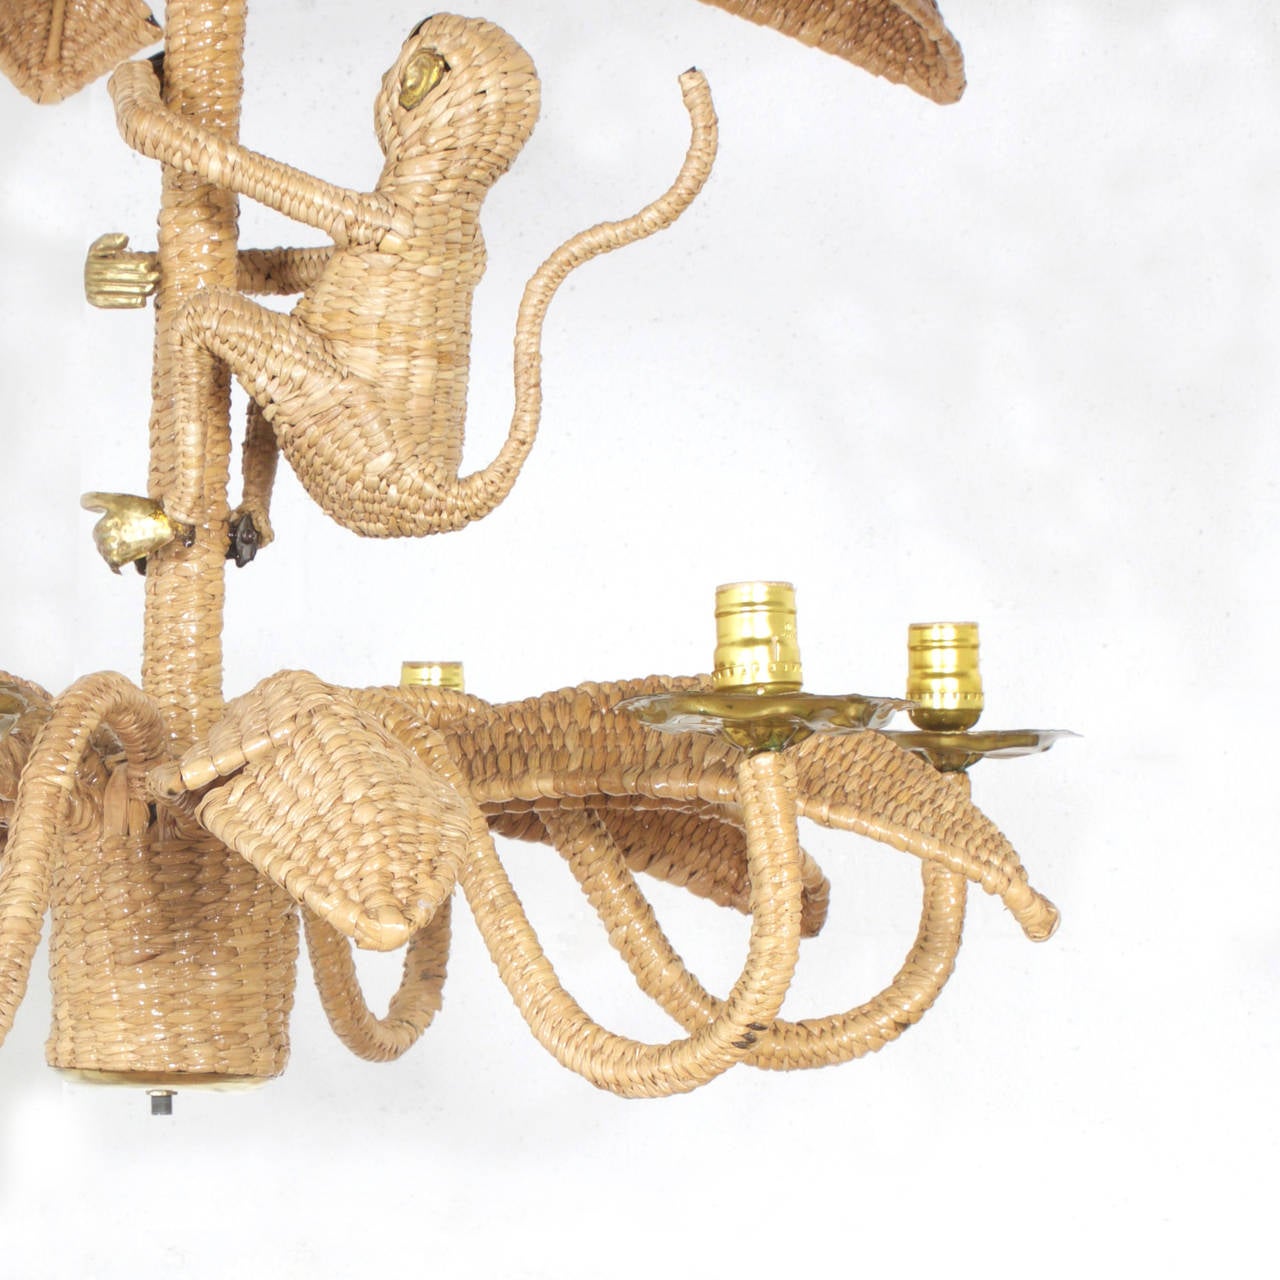 Amusing Mario Torres six-light chandelier constructed of a metal frame wrapped in wicker or reed in a tight intricate pattern. Featuring a wicker monkey with a brass face, hands and feet that is climbing a palm tree. Labelled with Mario Lopez Torres